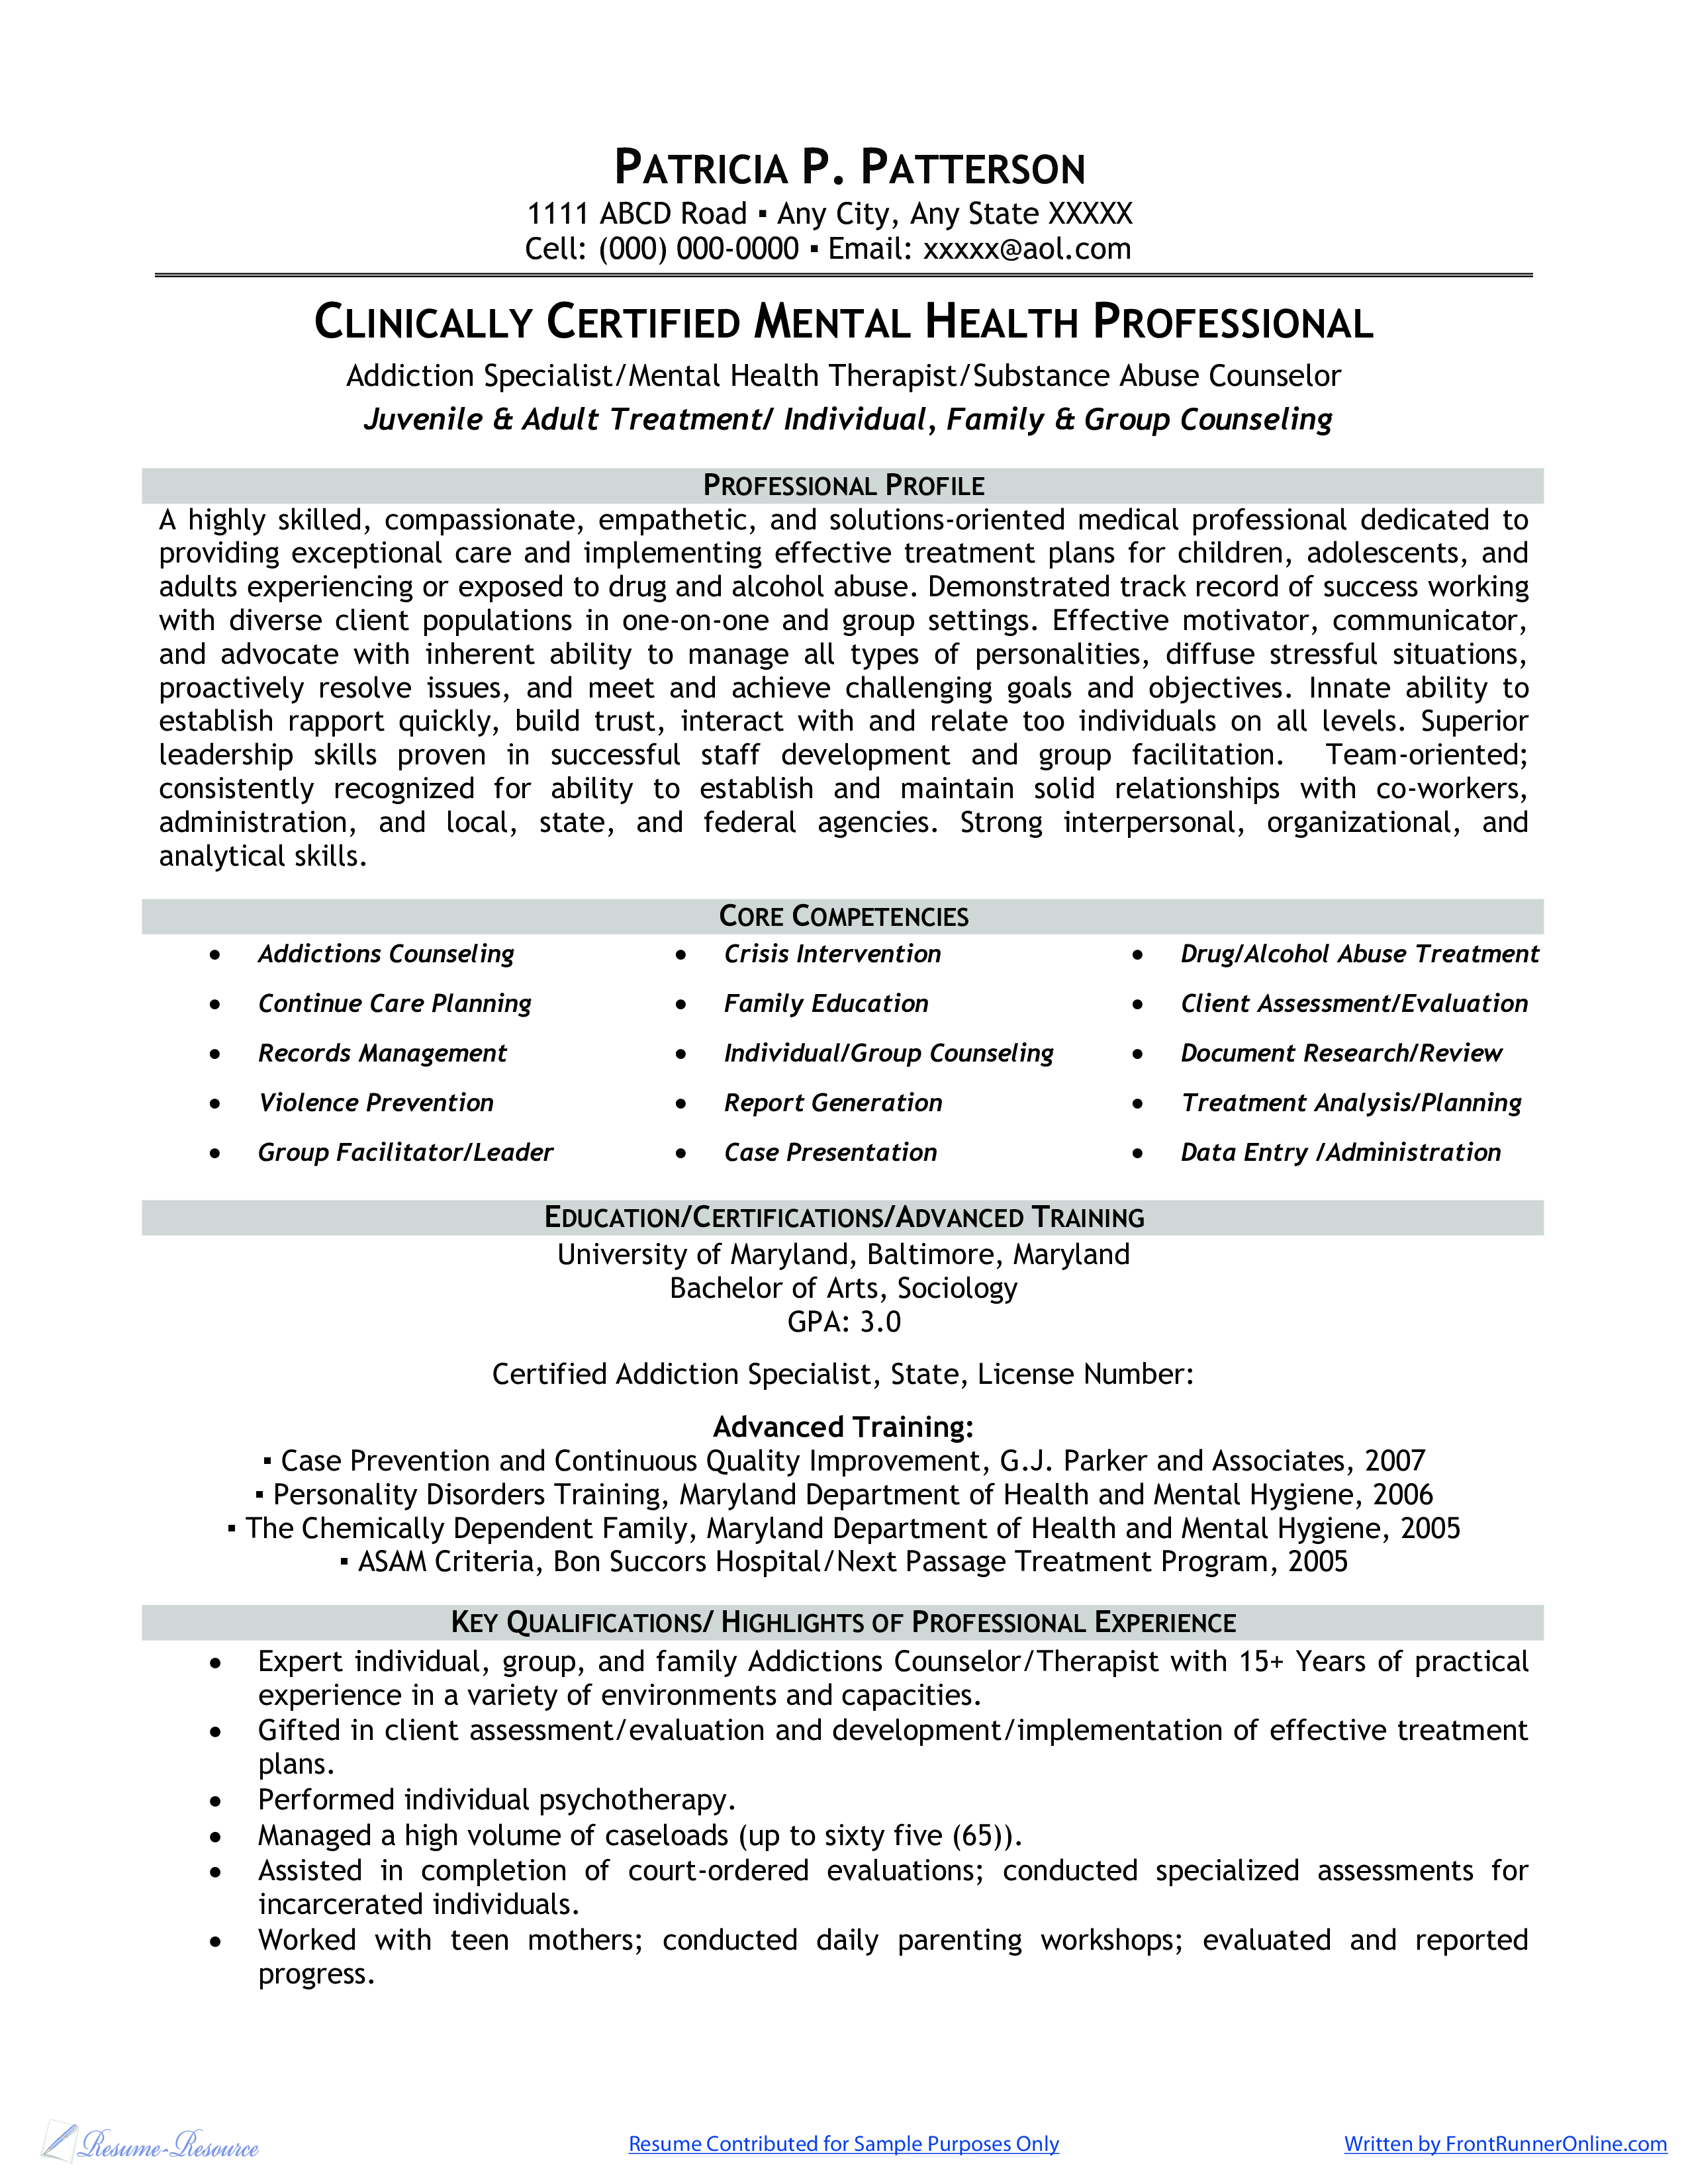 Free Clinically Certified Mental Health Professional Resume Templates at